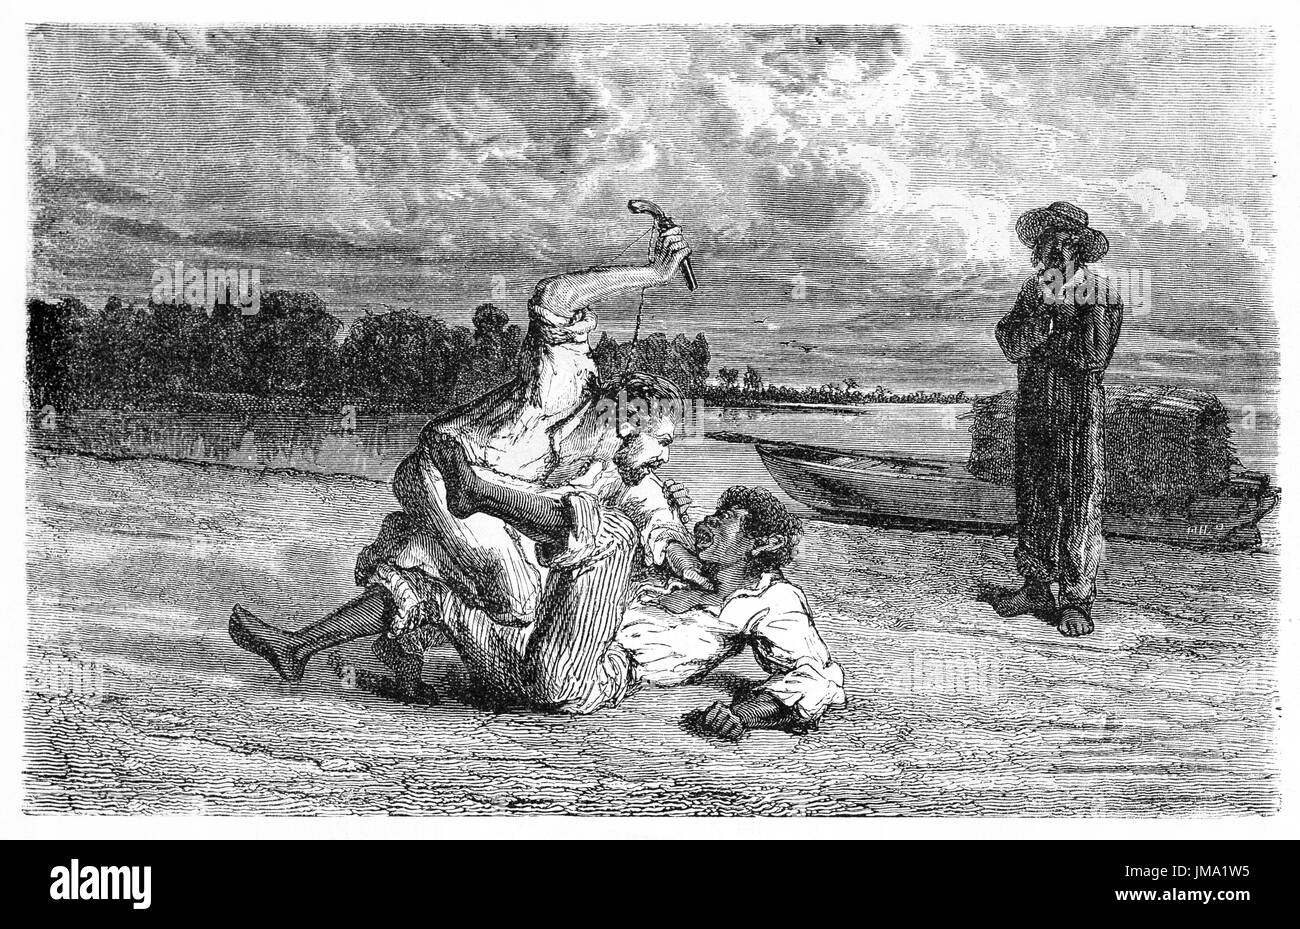 Old illustration of two man coming to blows on Amazon river bank ...